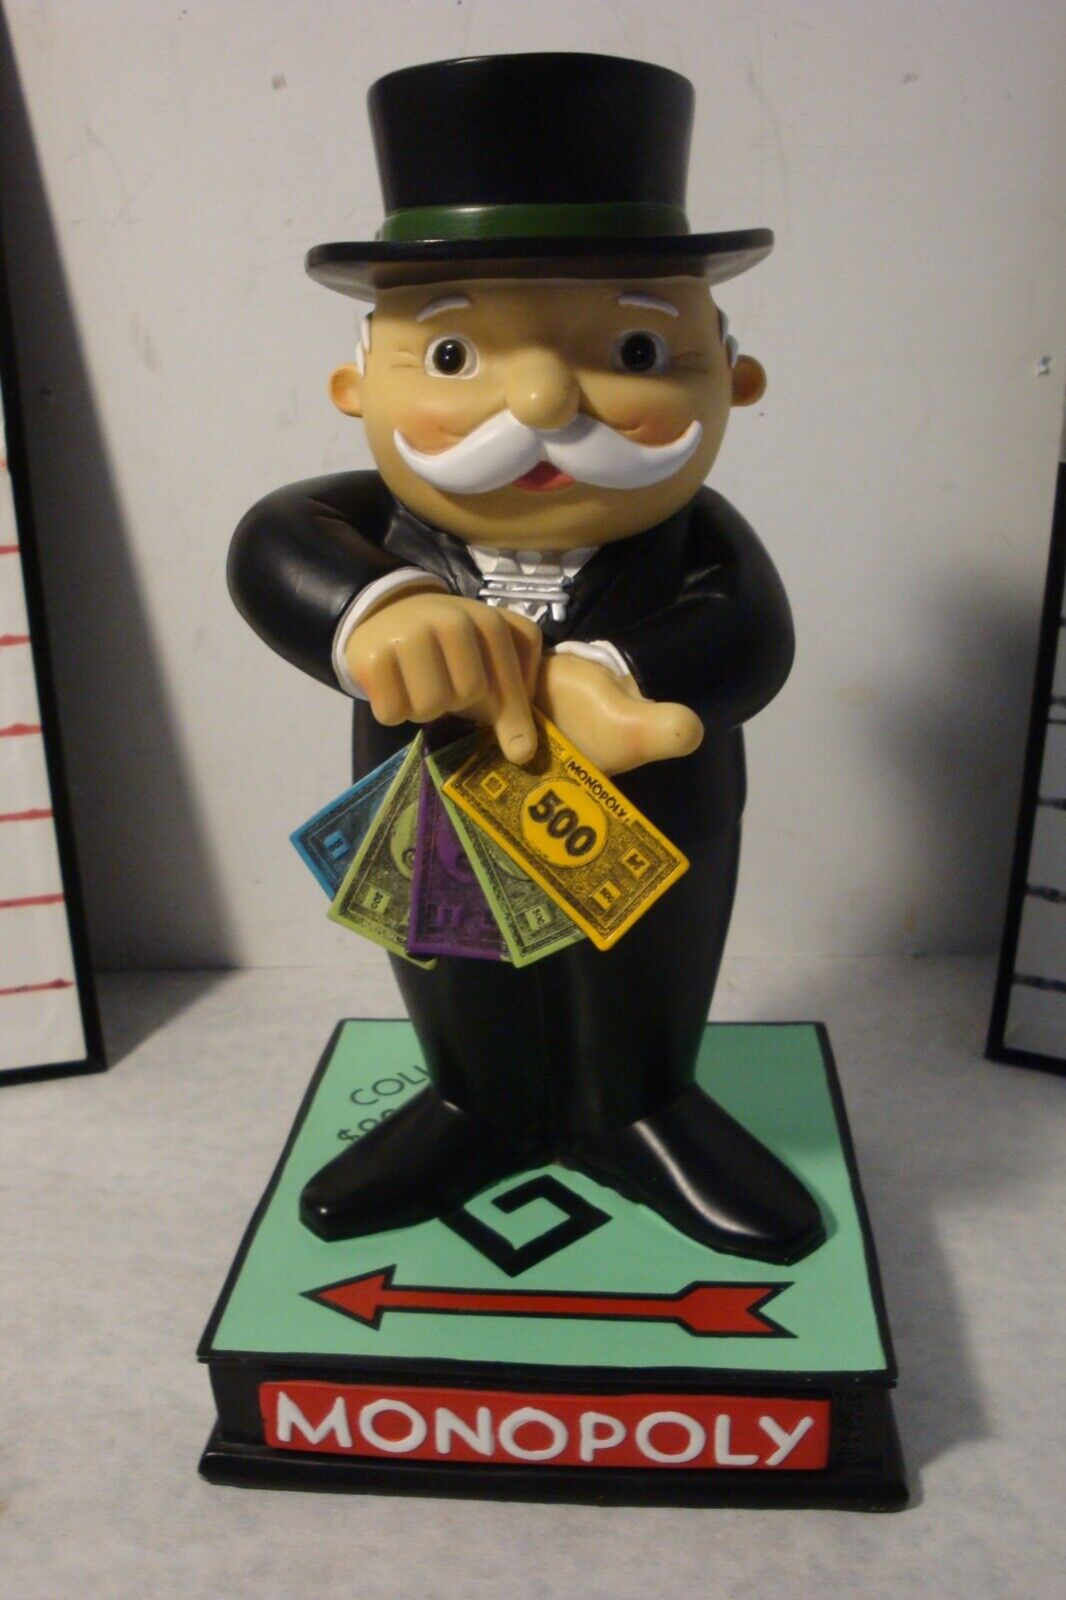 Rare Mr. Monopoly ceramic bank figure 10 inches tall Showing  the money